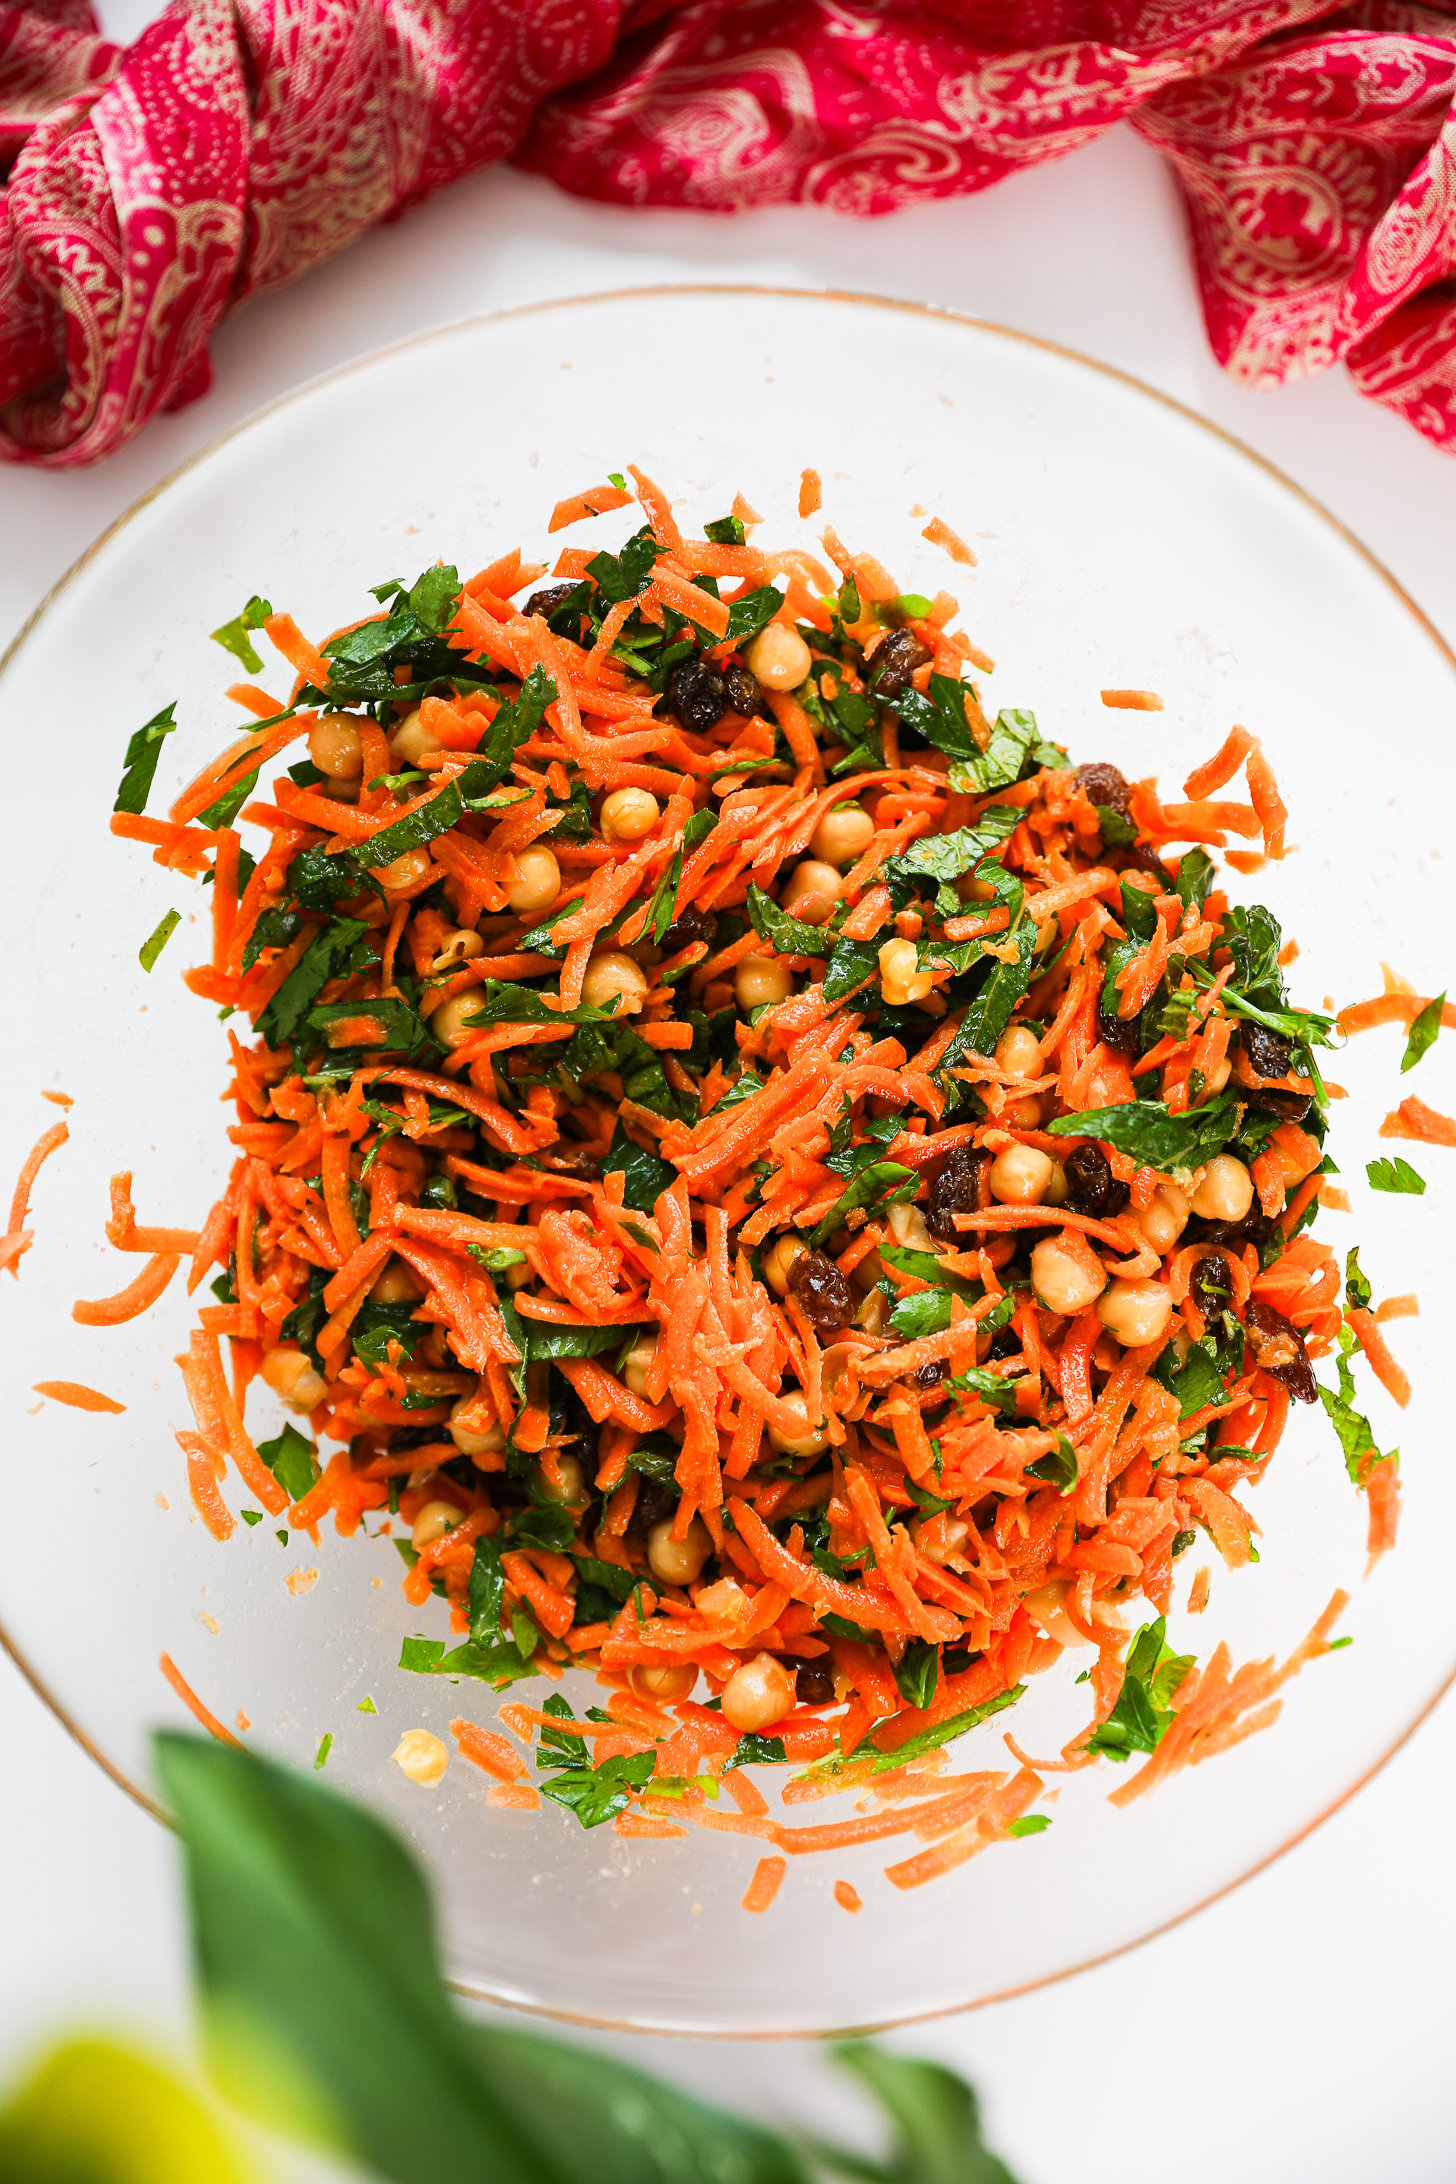 Overhead view of a salad bowl with grated carrots, chickpeas, raisins and herbs mixed together.